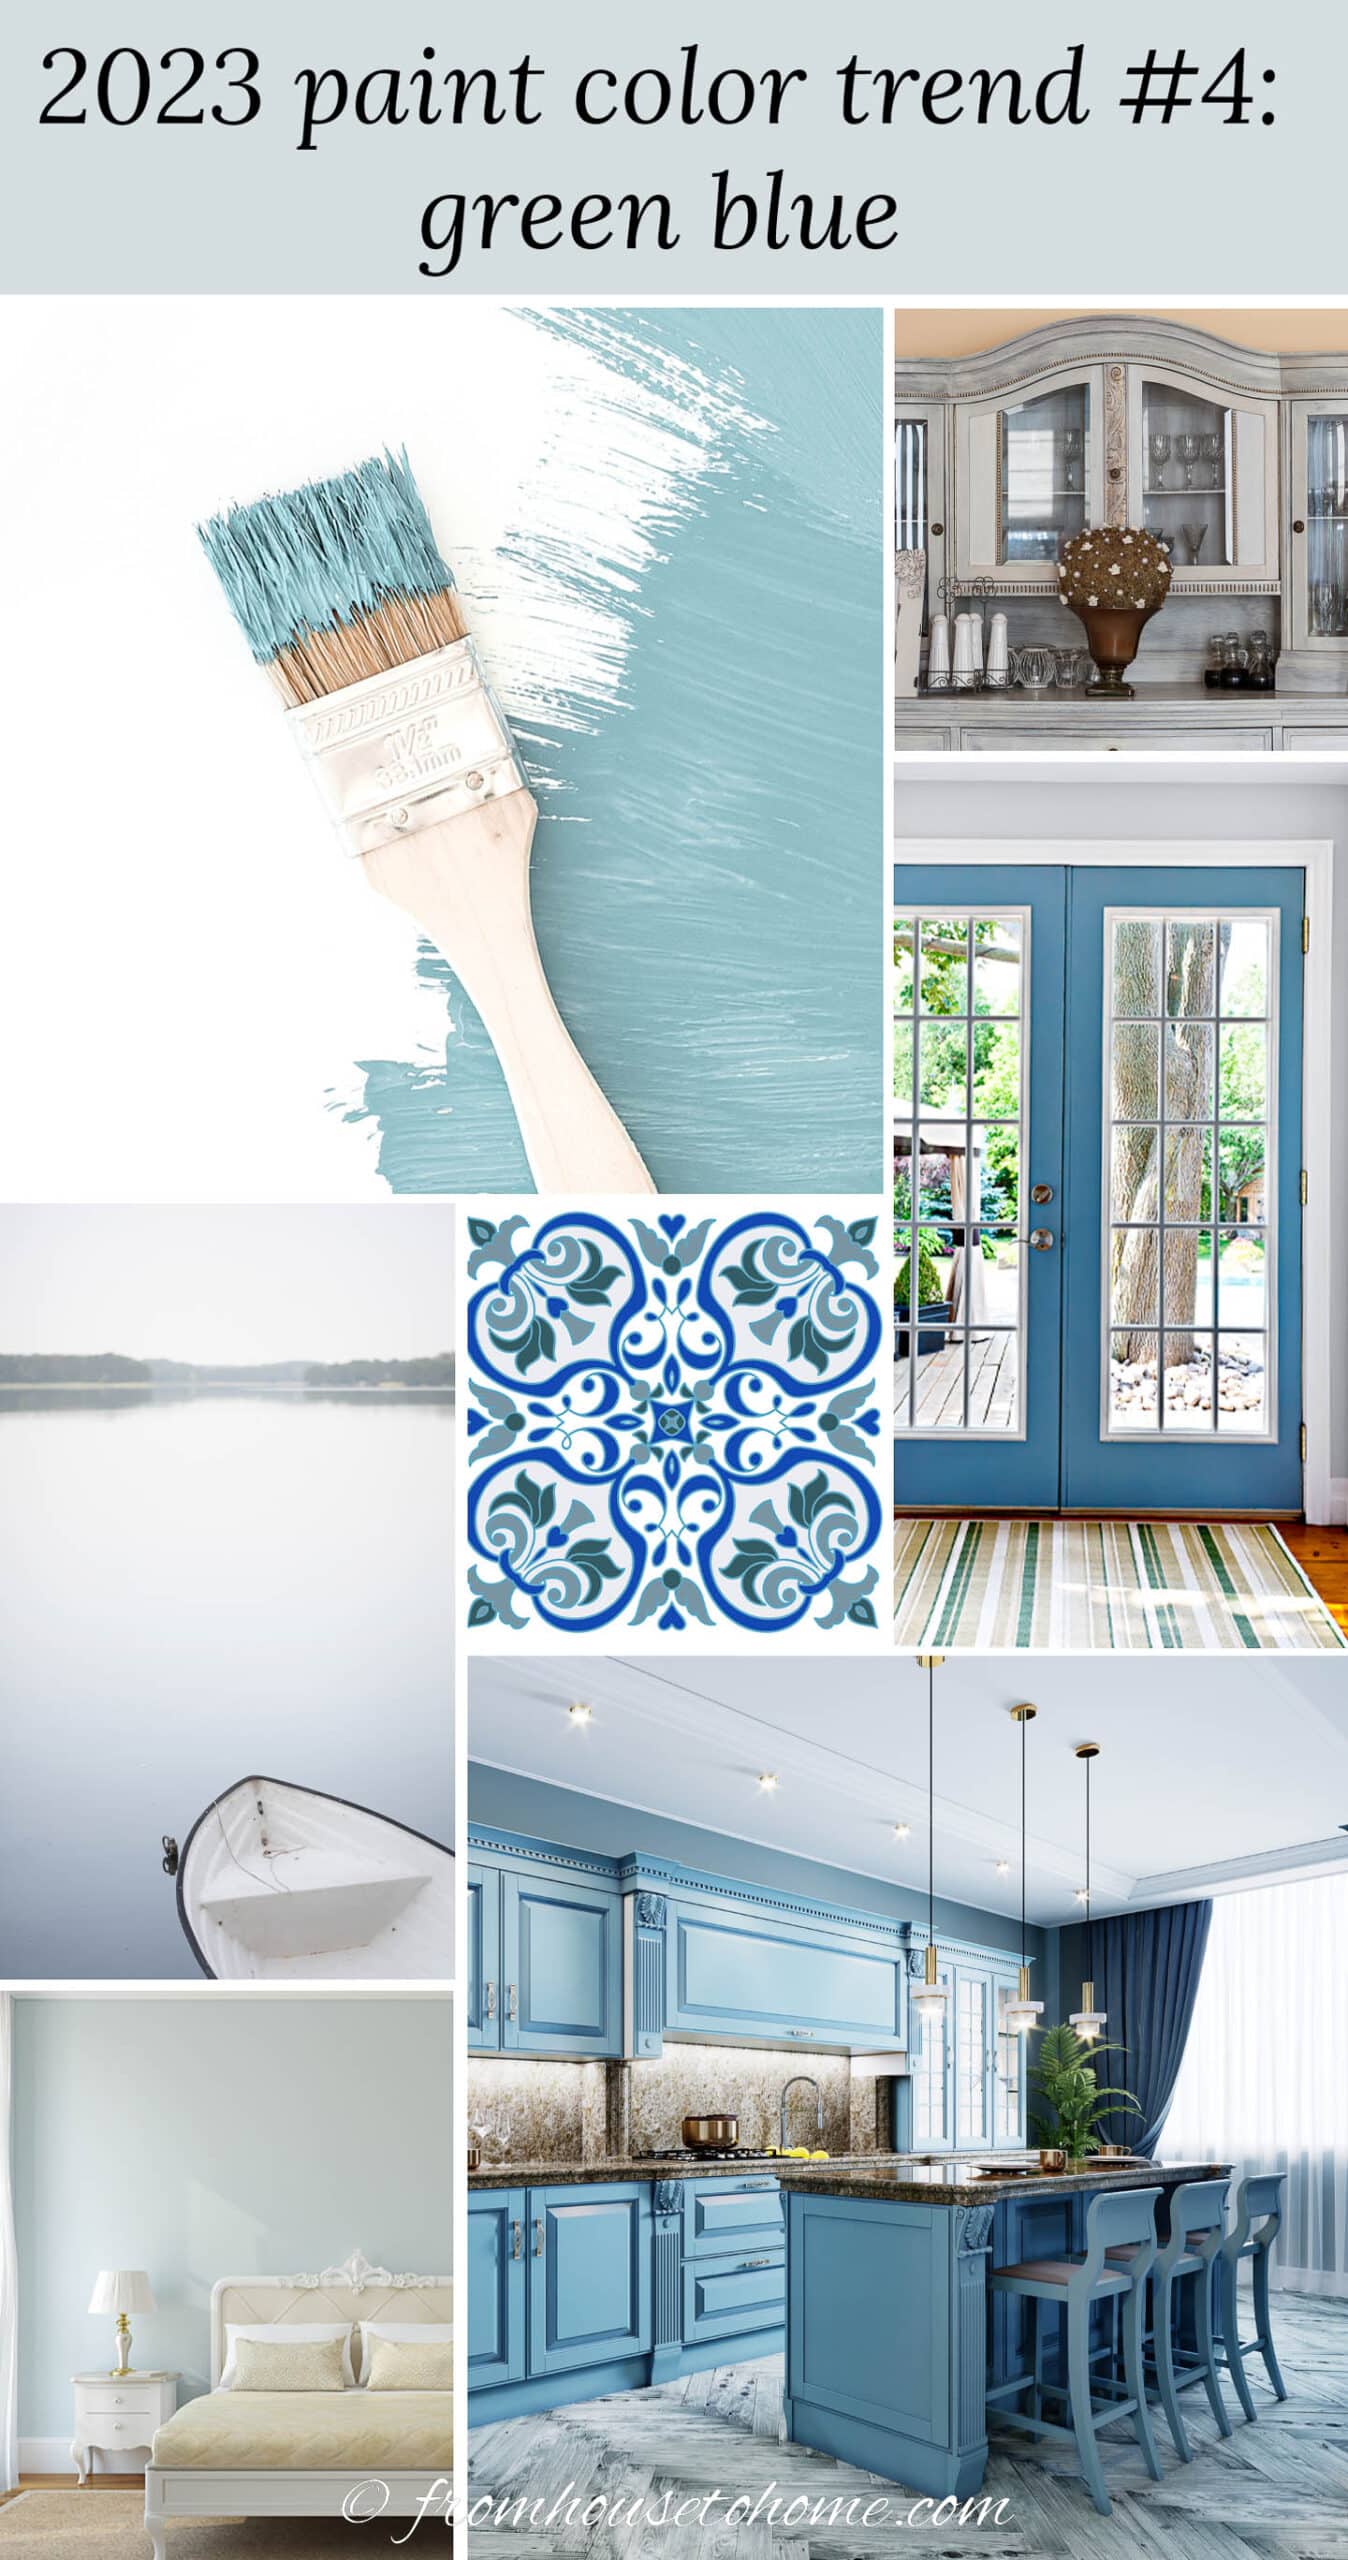 A collage of images using the 2023 paint color trend - blue green